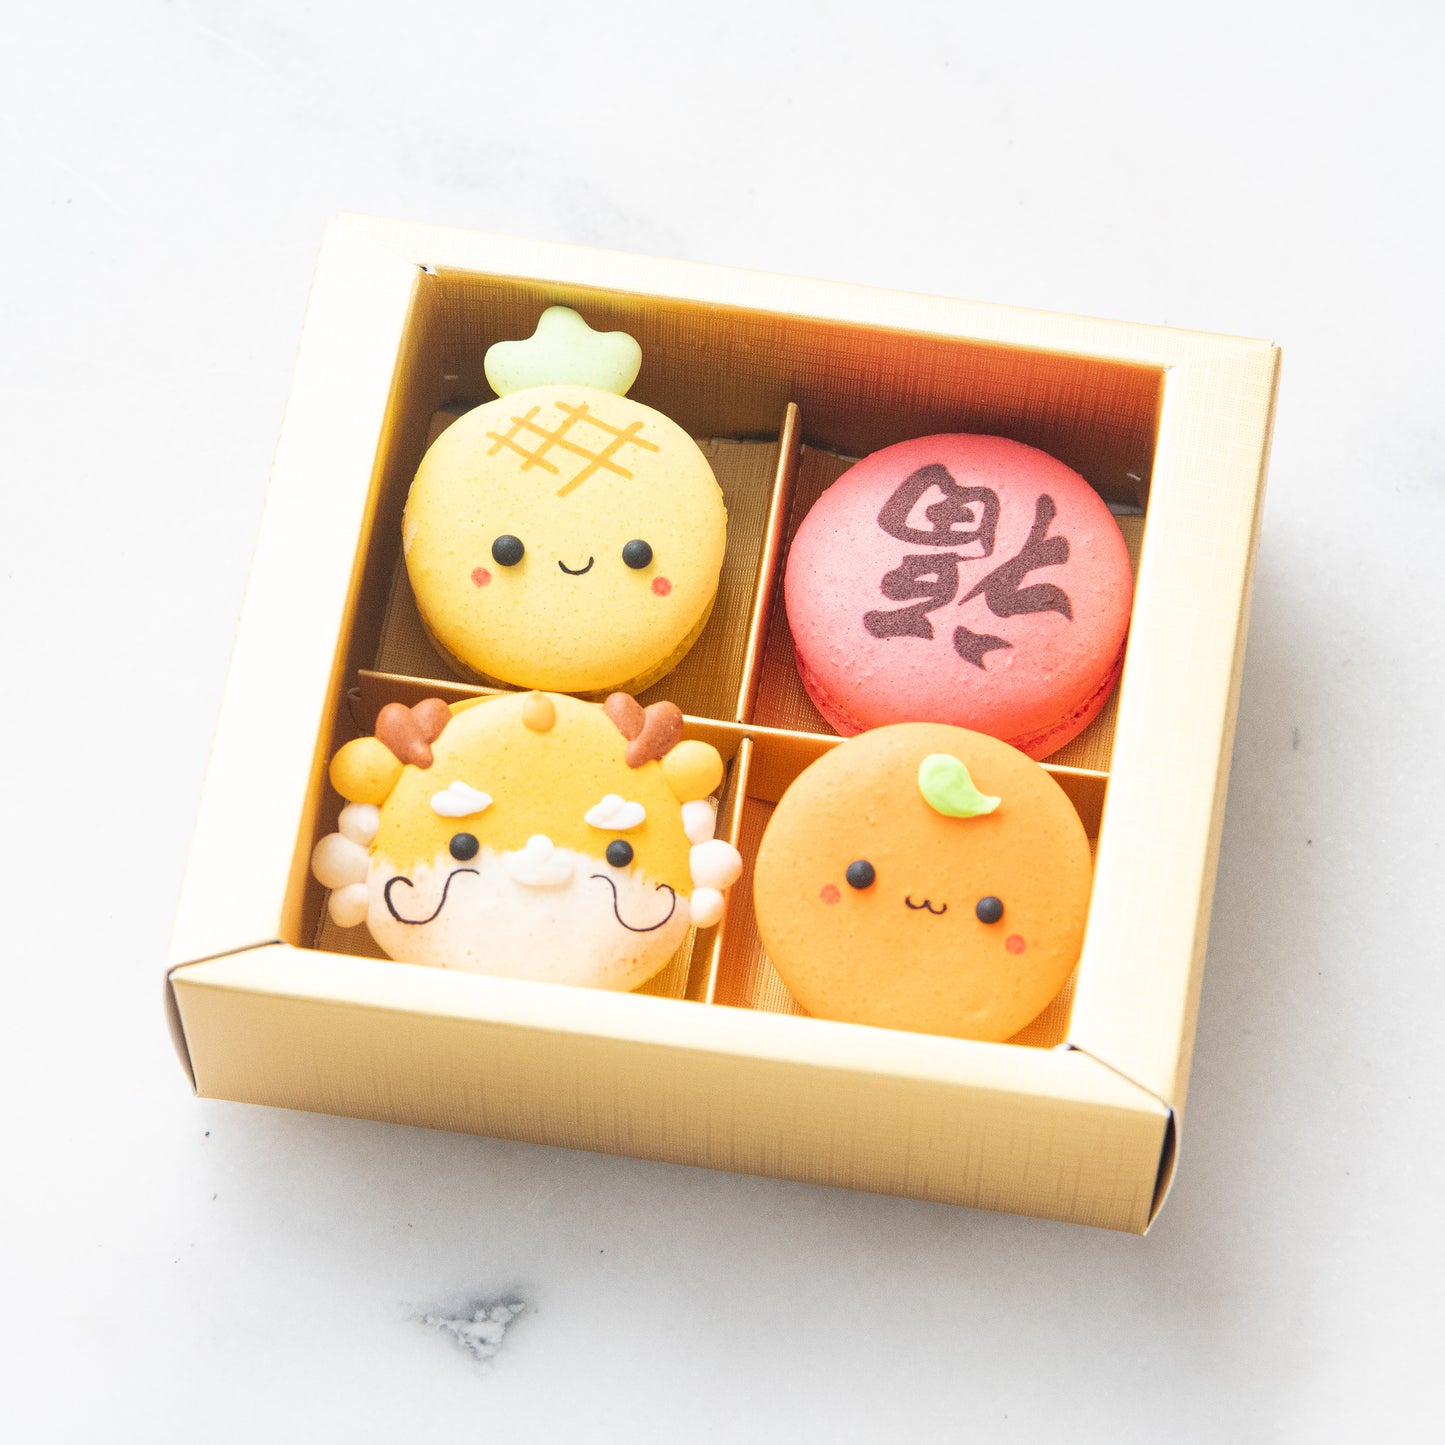 Year Of The Dragon! | 4in1 Intelligent Dragon 龙 in Gift Box | $12.80 Nett only